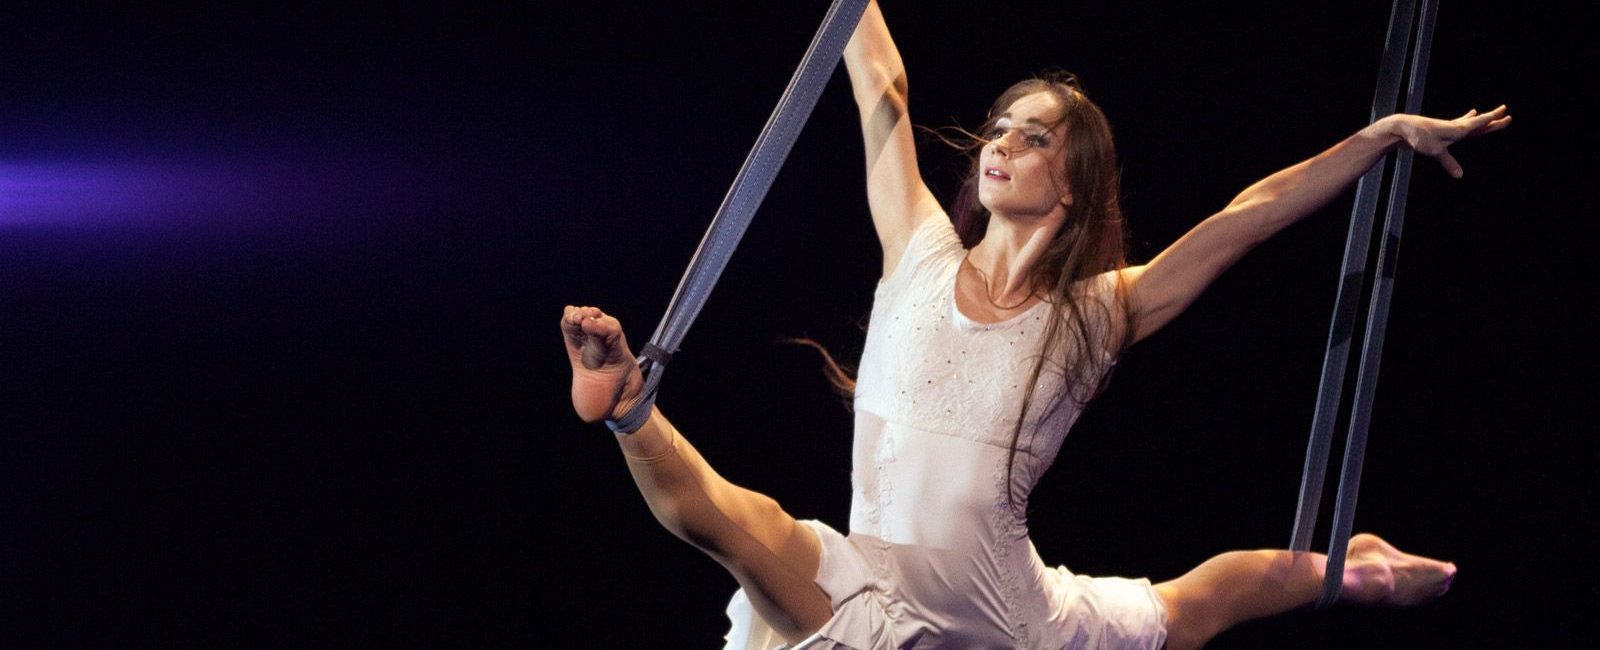 Meet a Stunning Aerial Straps Contortionist and Champion